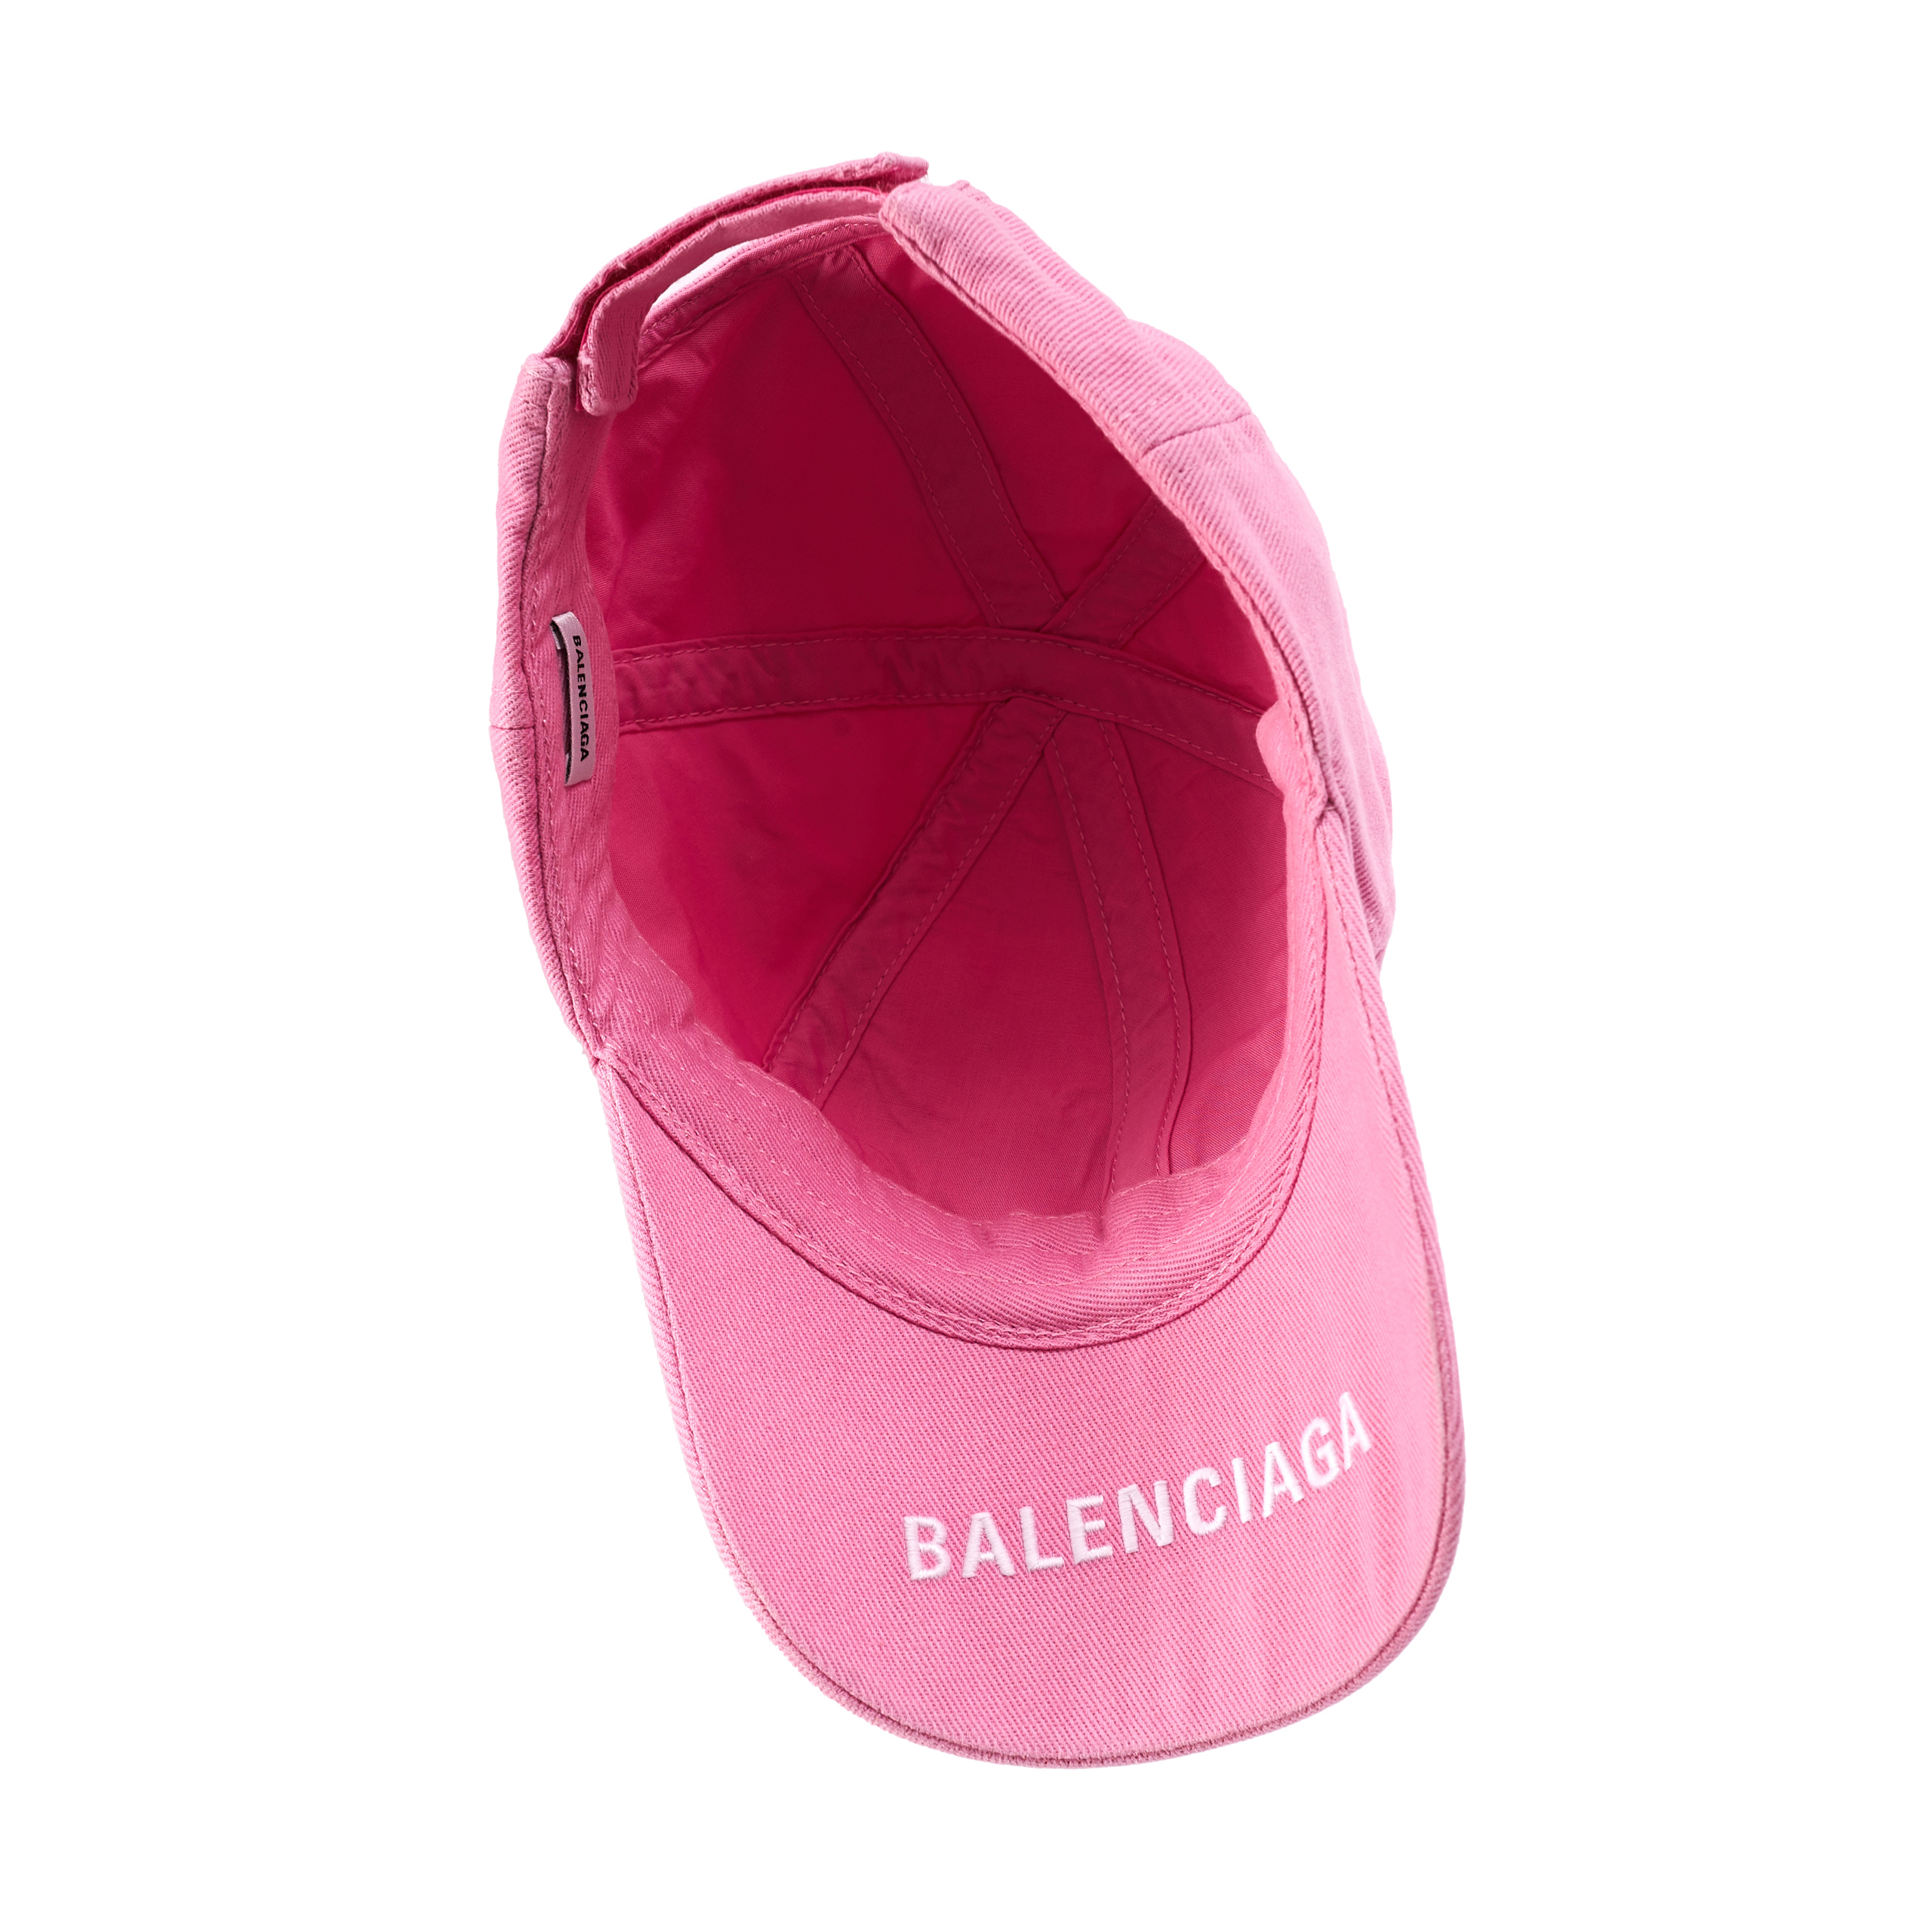 Buy Balenciaga women pink embroidered gay cap for $443 online 